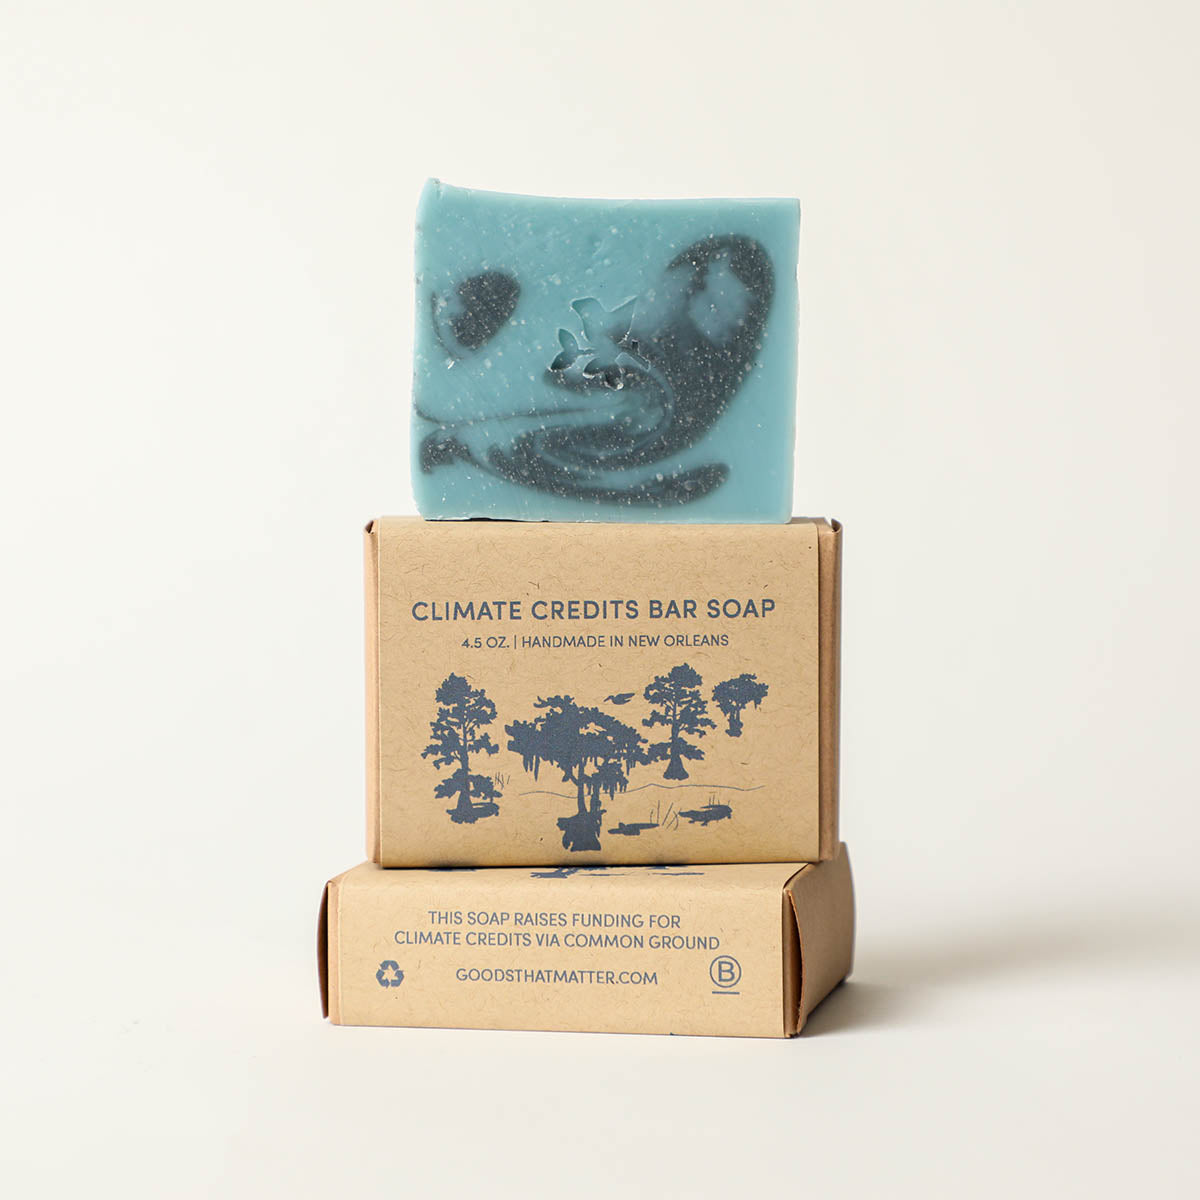 Climate Credits Bar Soap - Gives to Common Ground Relief, Coastal Climate Credits